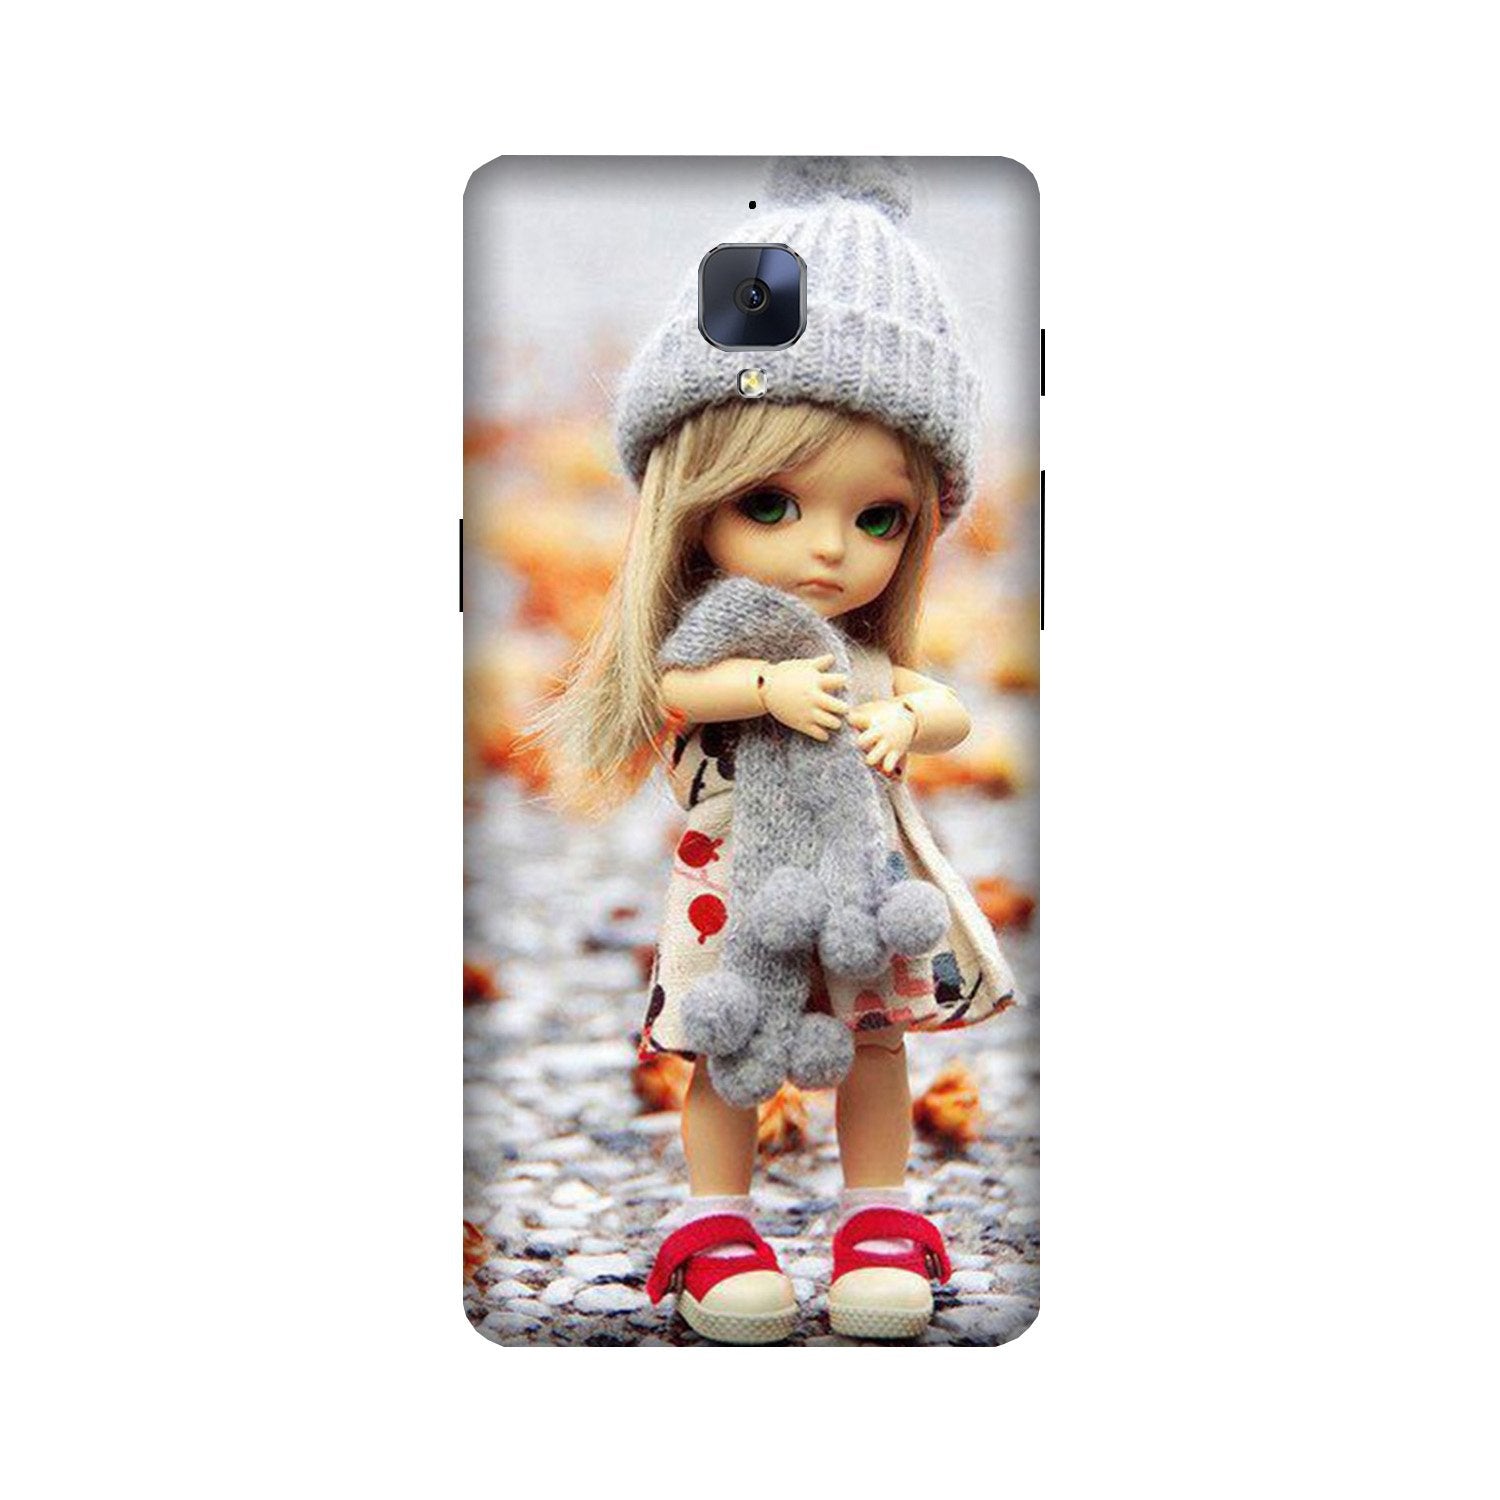 Cute Doll Case for OnePlus 3/ 3T